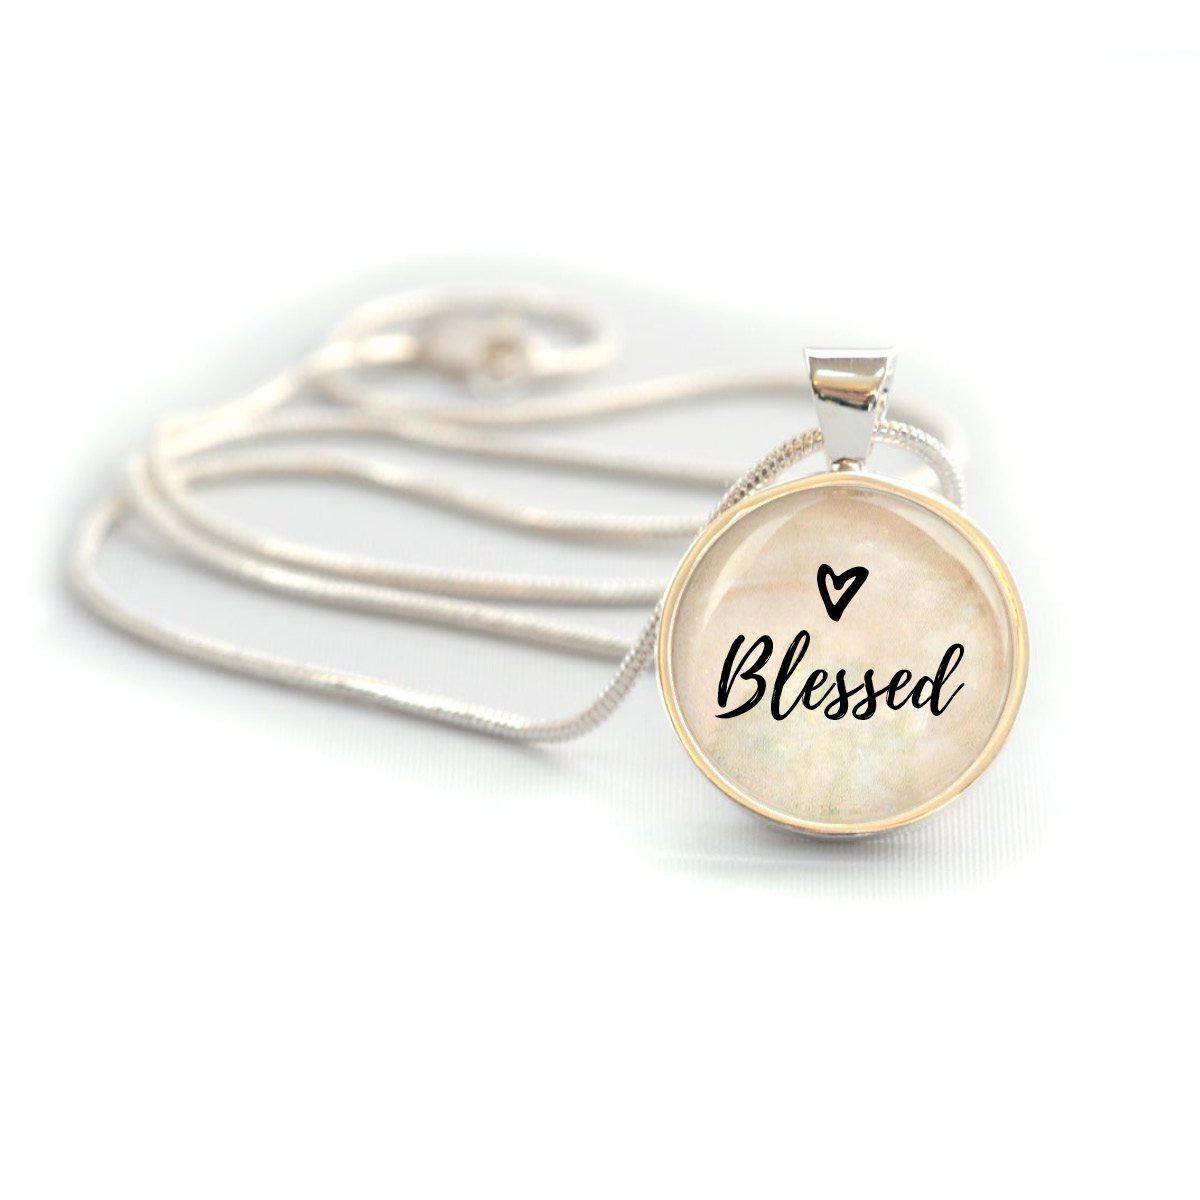 "Blessed" Silver-Plated Pendant Necklace